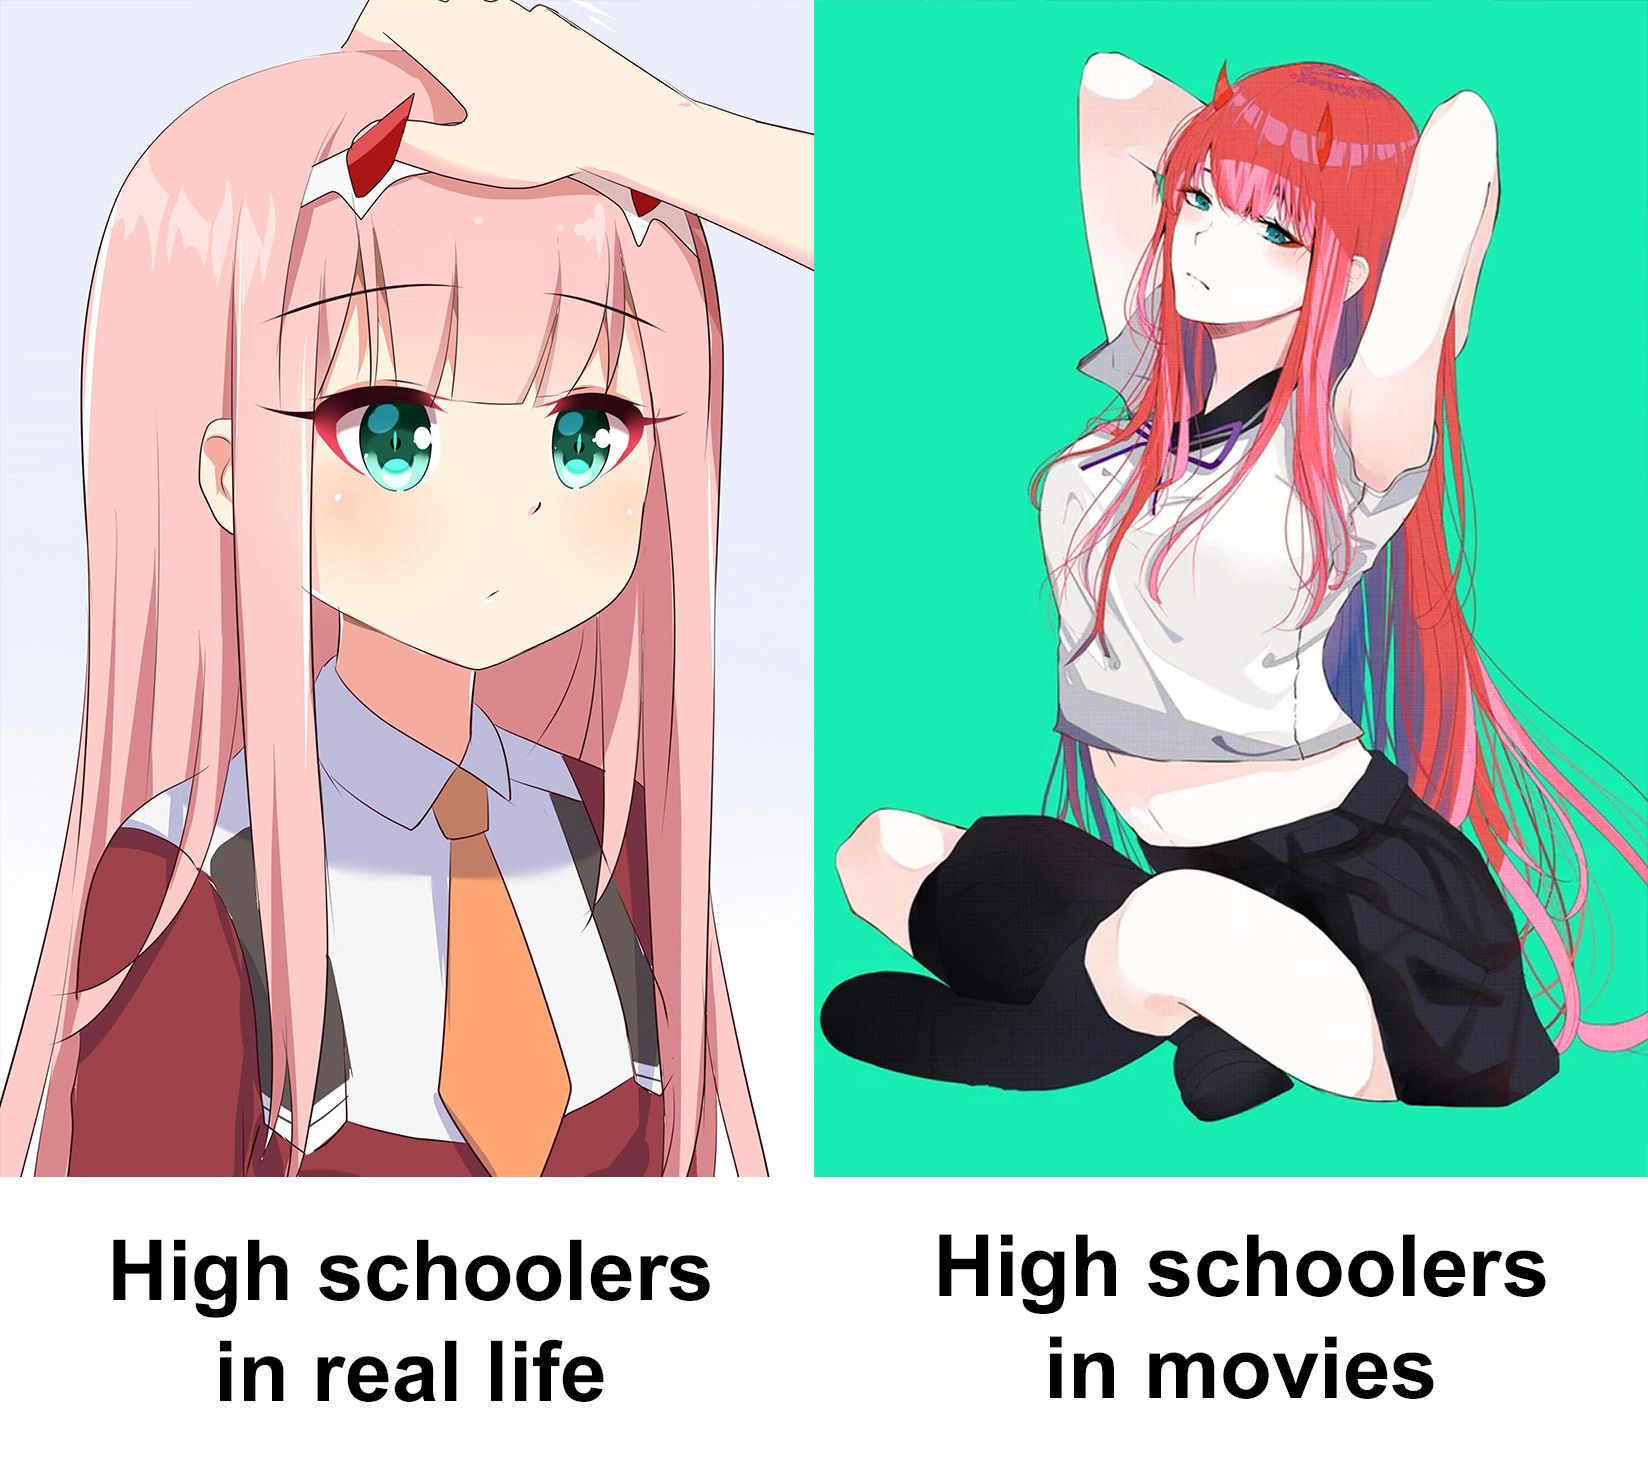 Actors for high school characters are like 25 years old